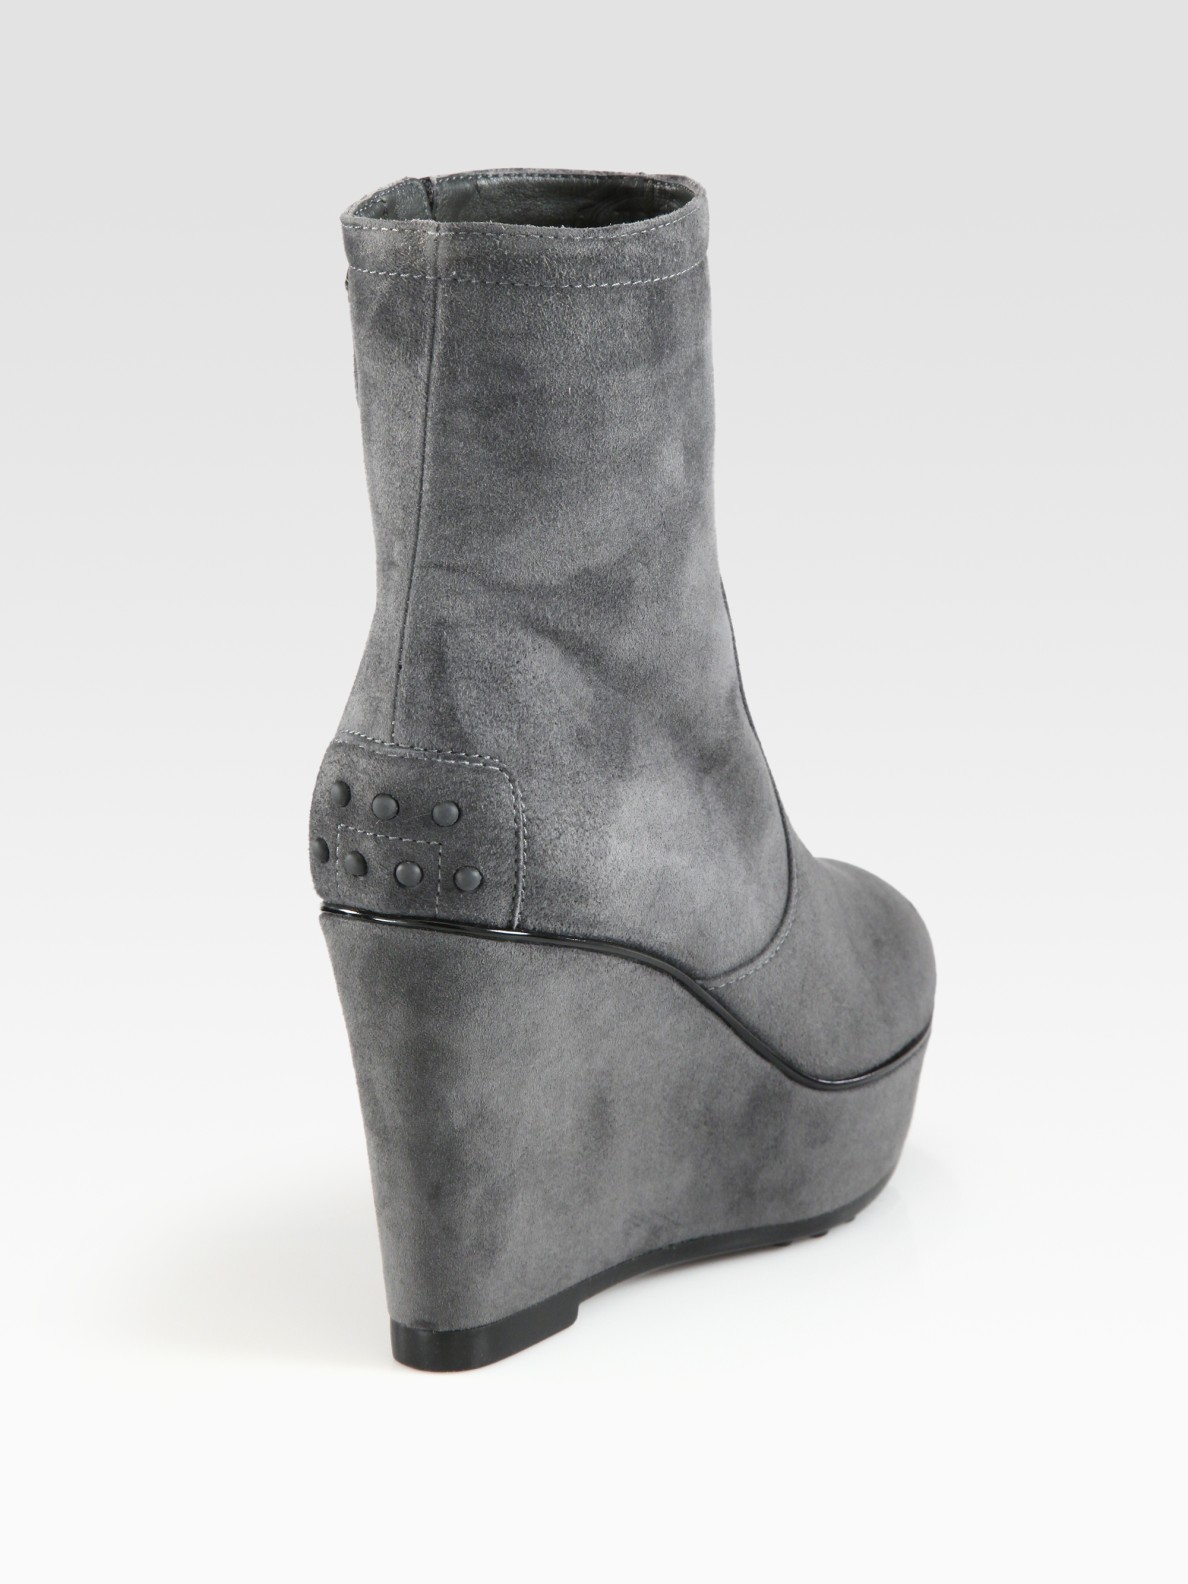 Tod's Suede Wedge Ankle Boots in Grey (Gray) - Lyst